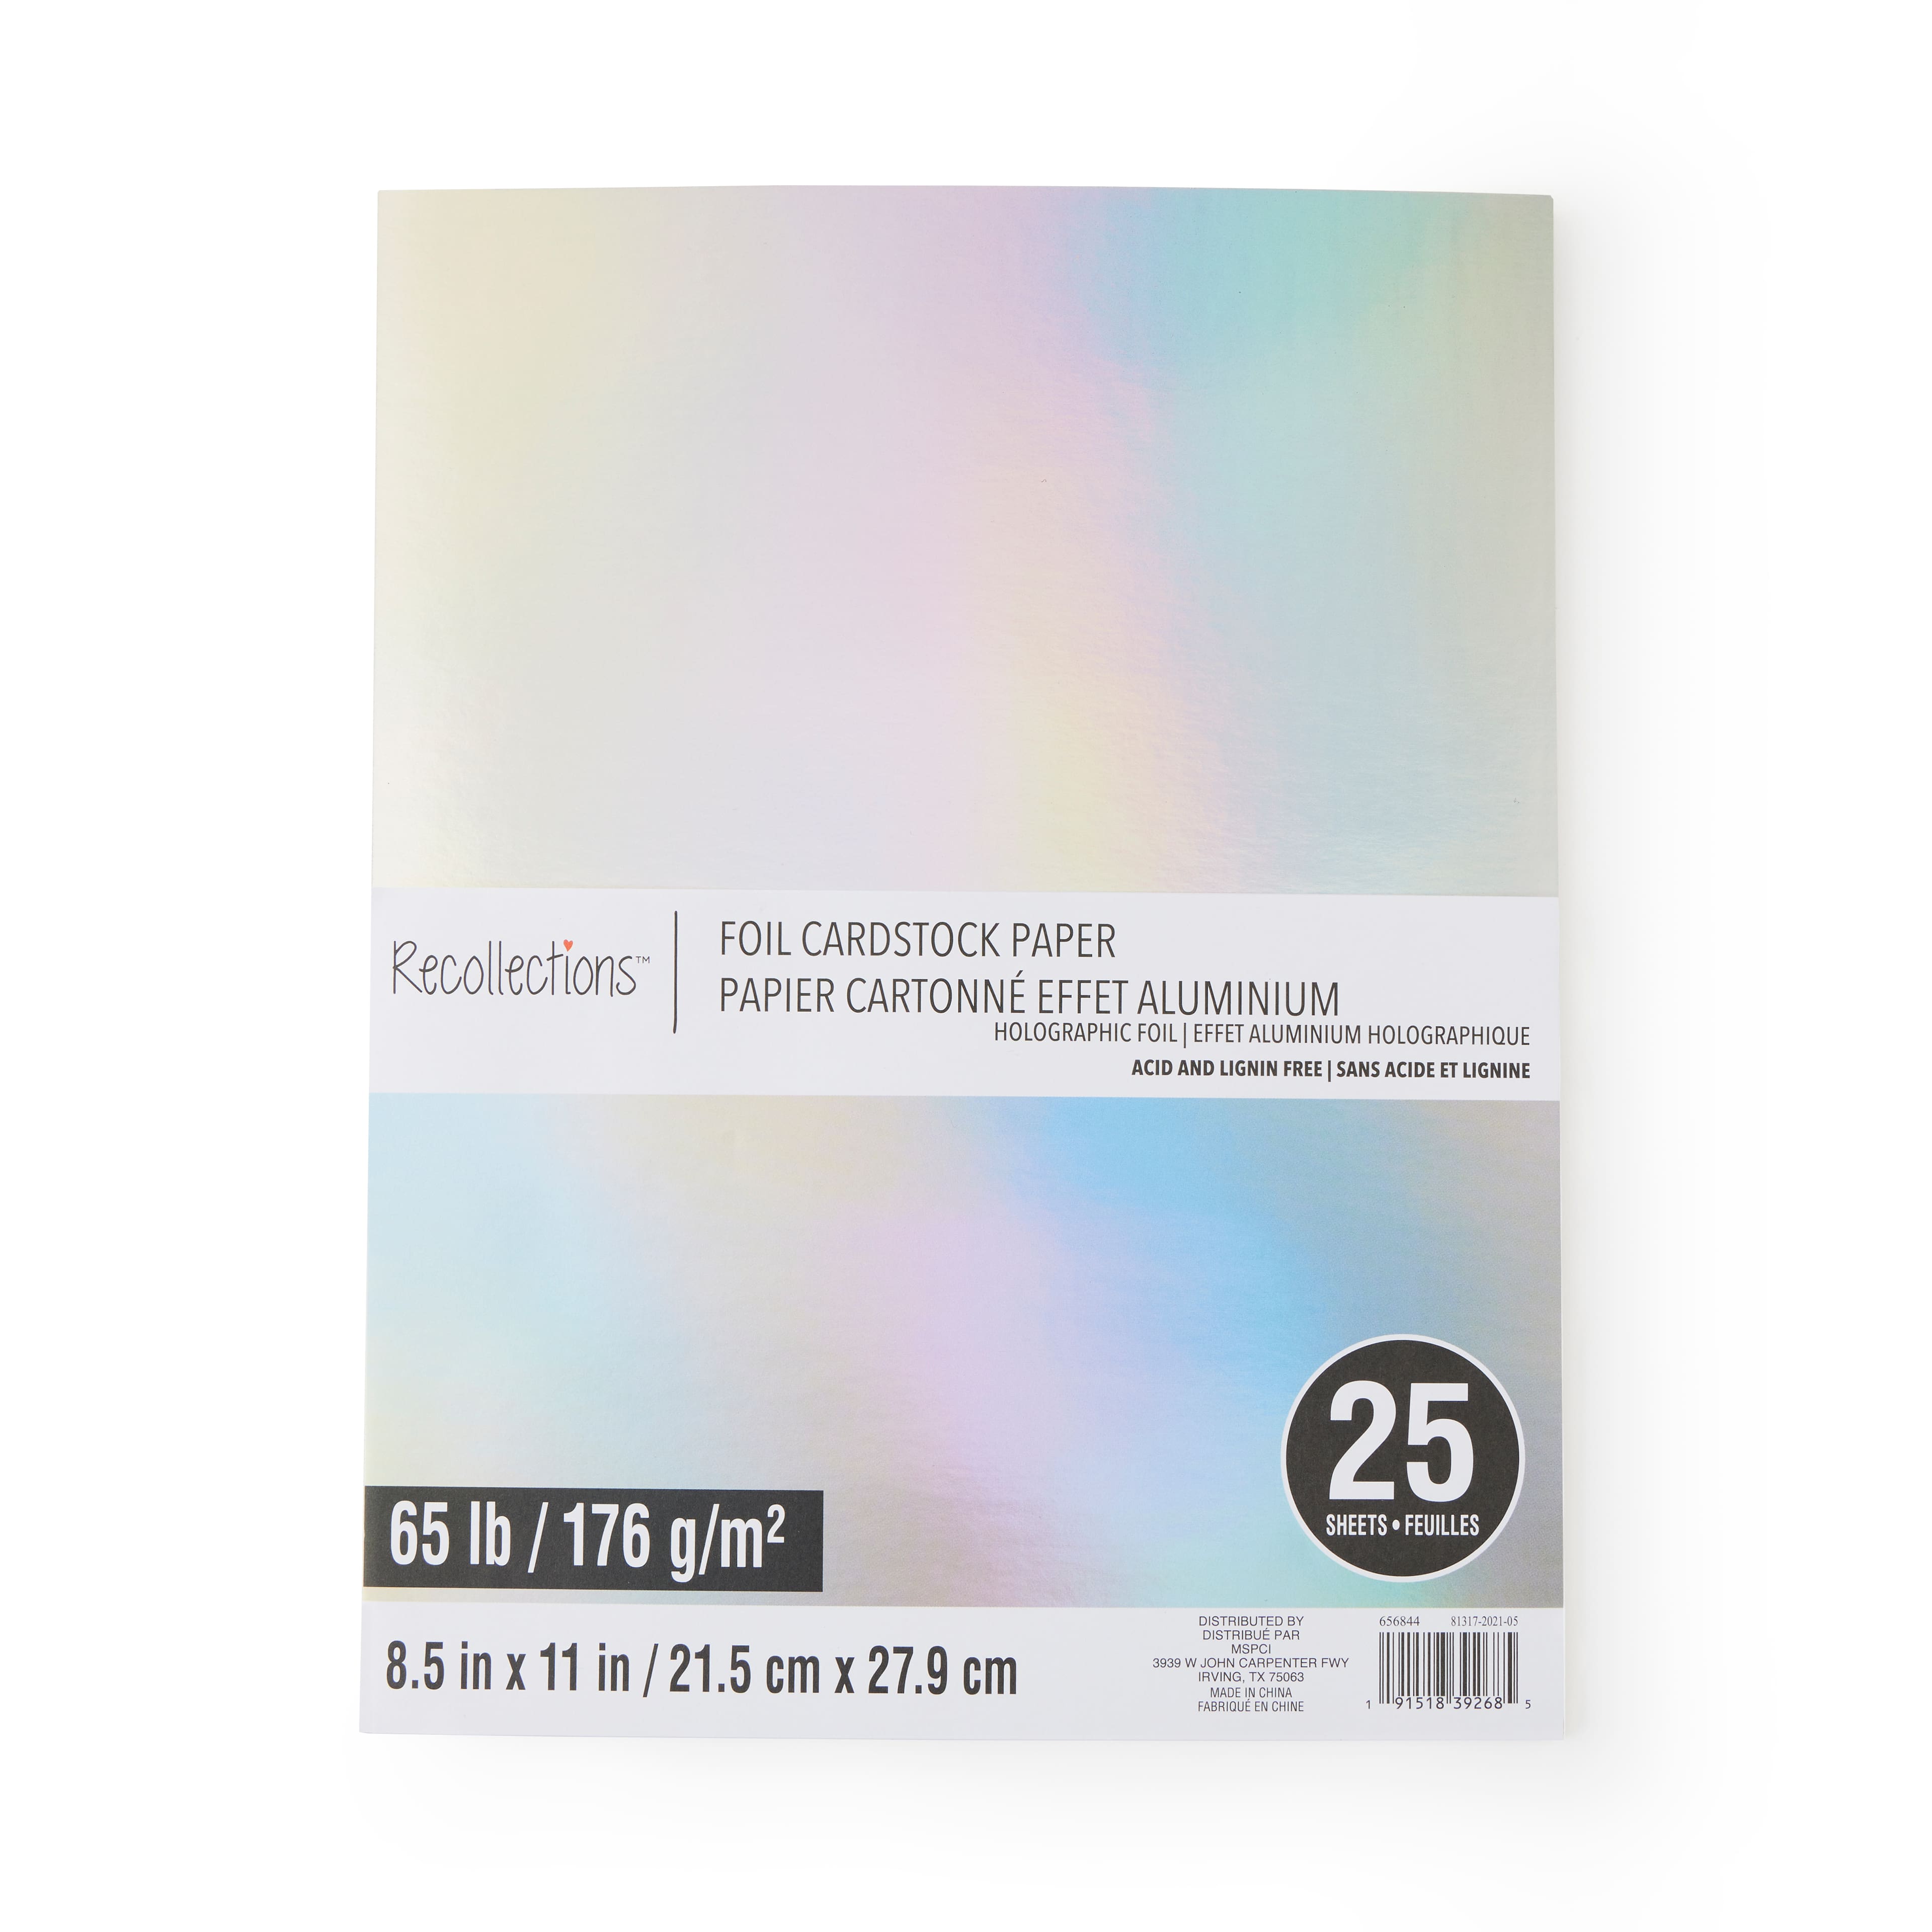 Primary Foil 8.5 x 11 Cardstock Paper by Recollections™, 25 Sheets